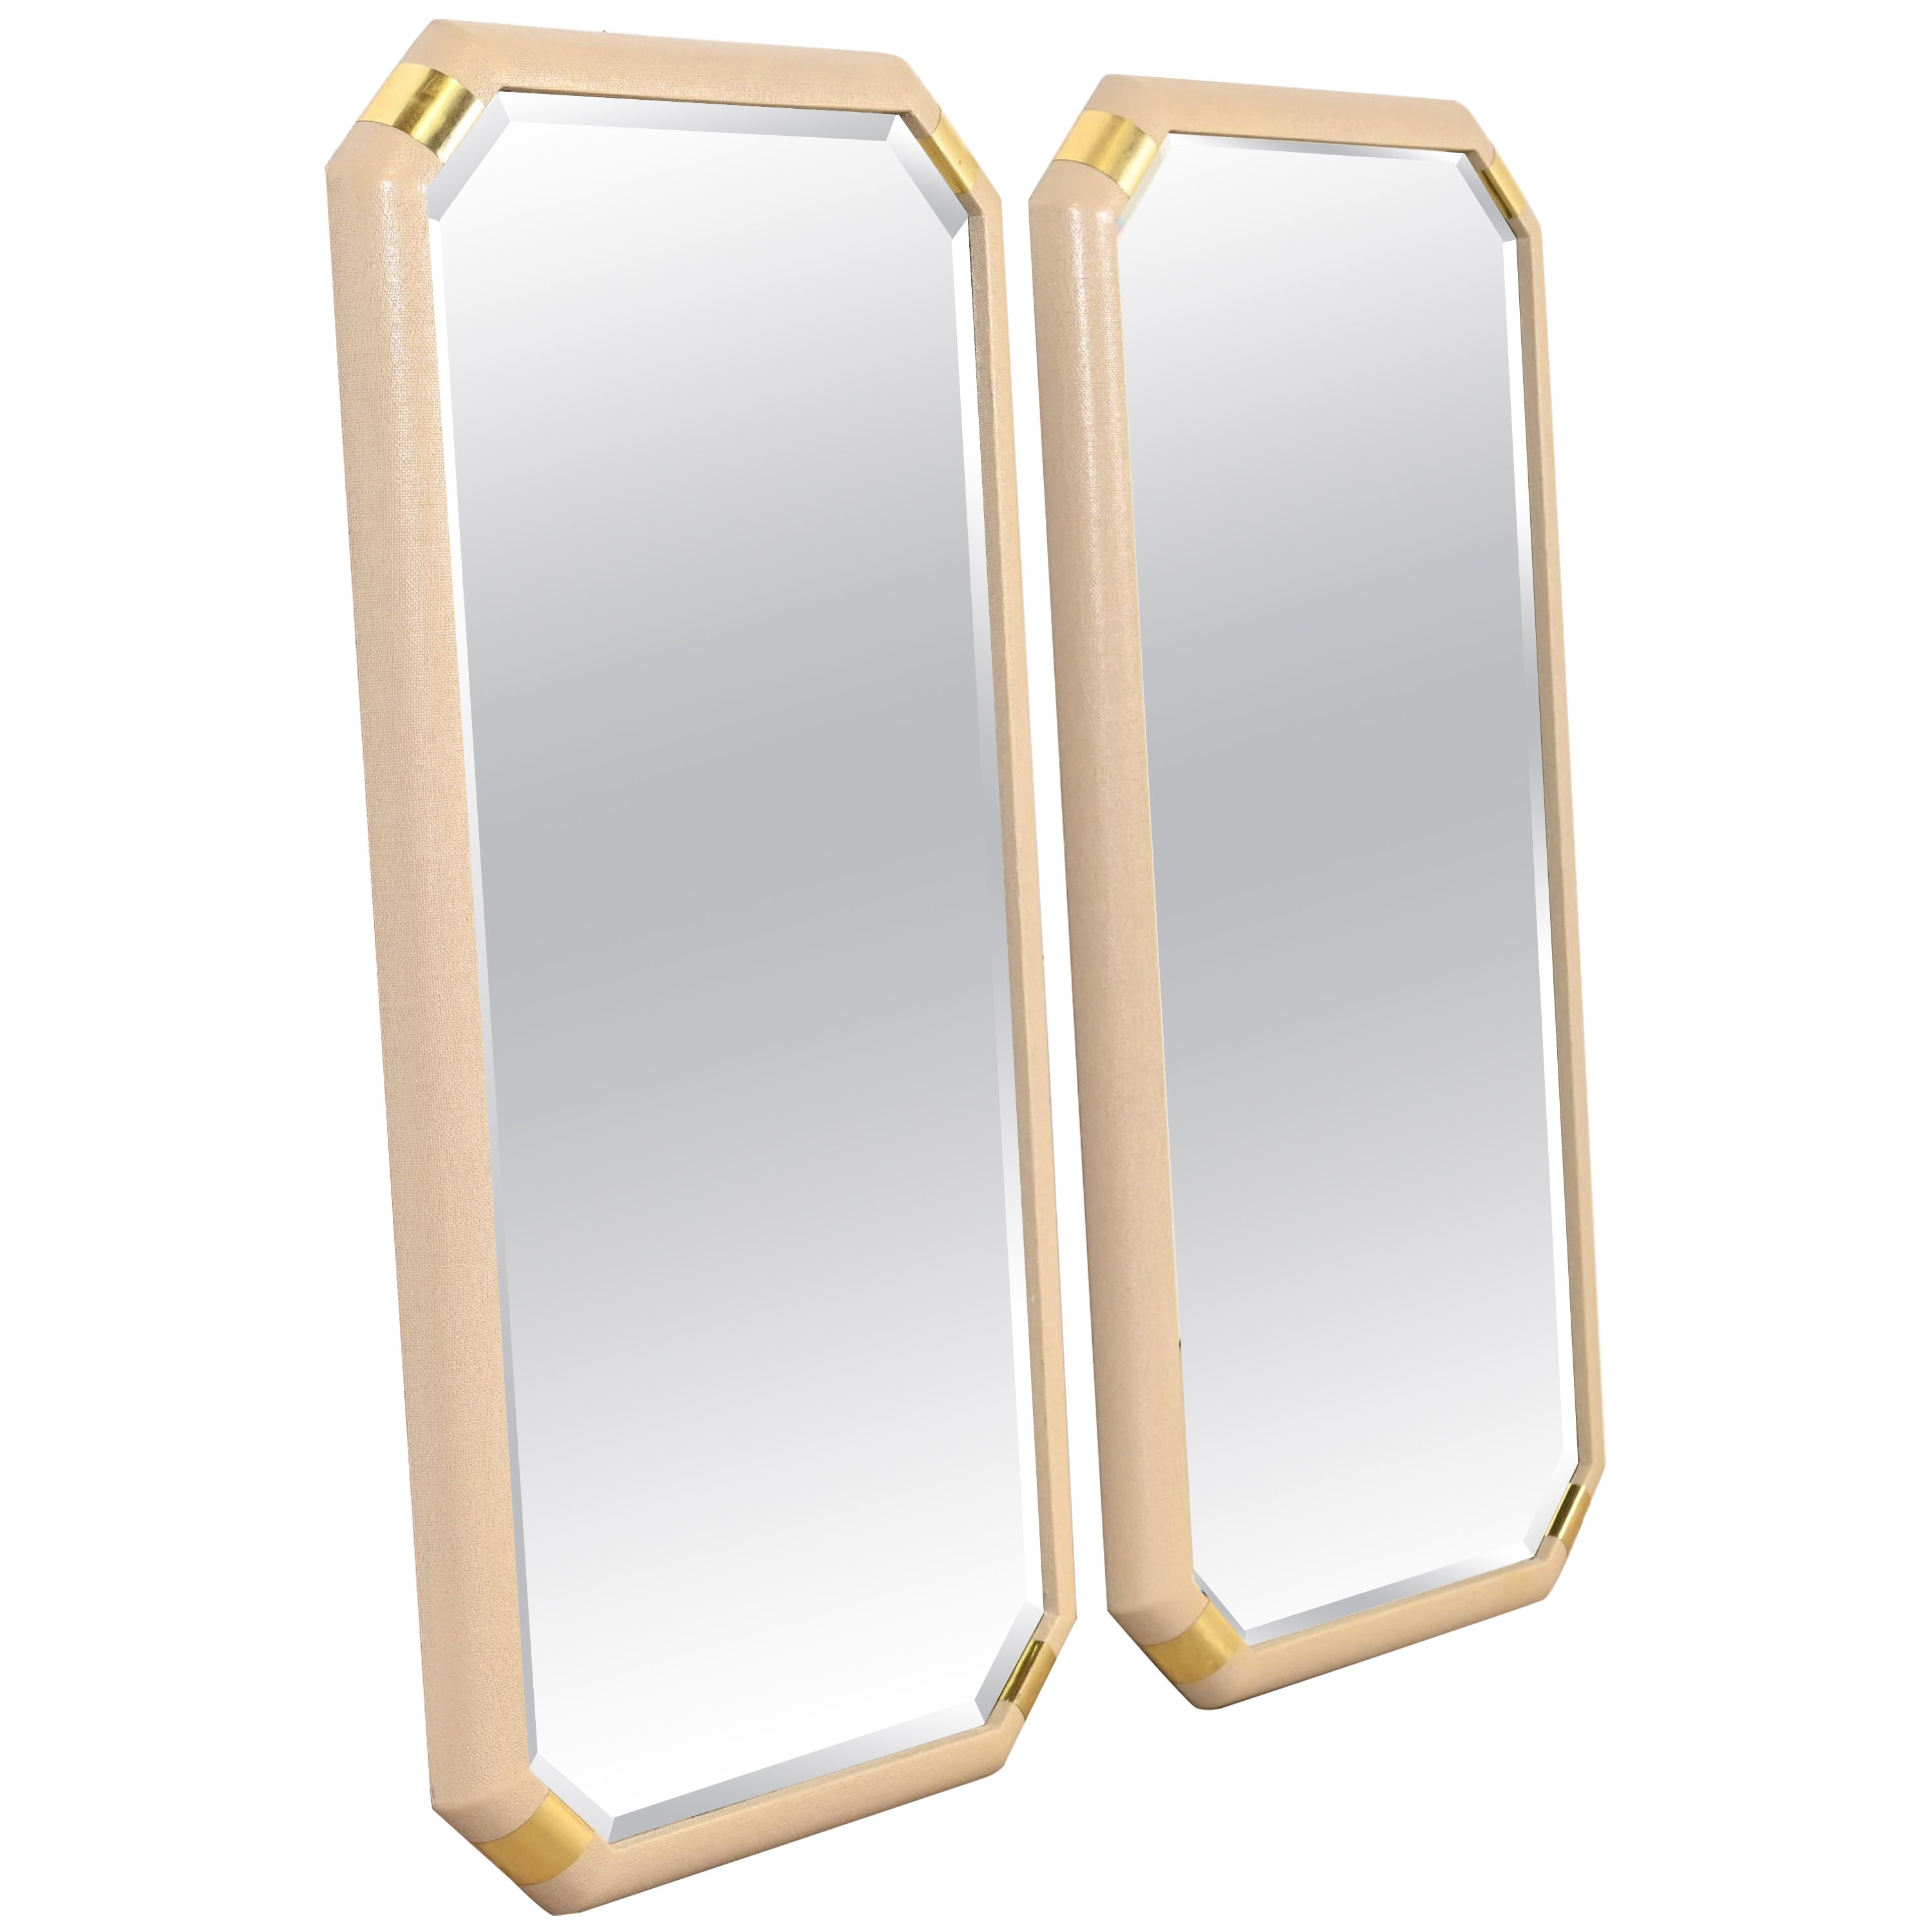 Romweber Hollywood Regency Lacquered Grasscloth and Brass Wall Mirrors, Pair For Sale